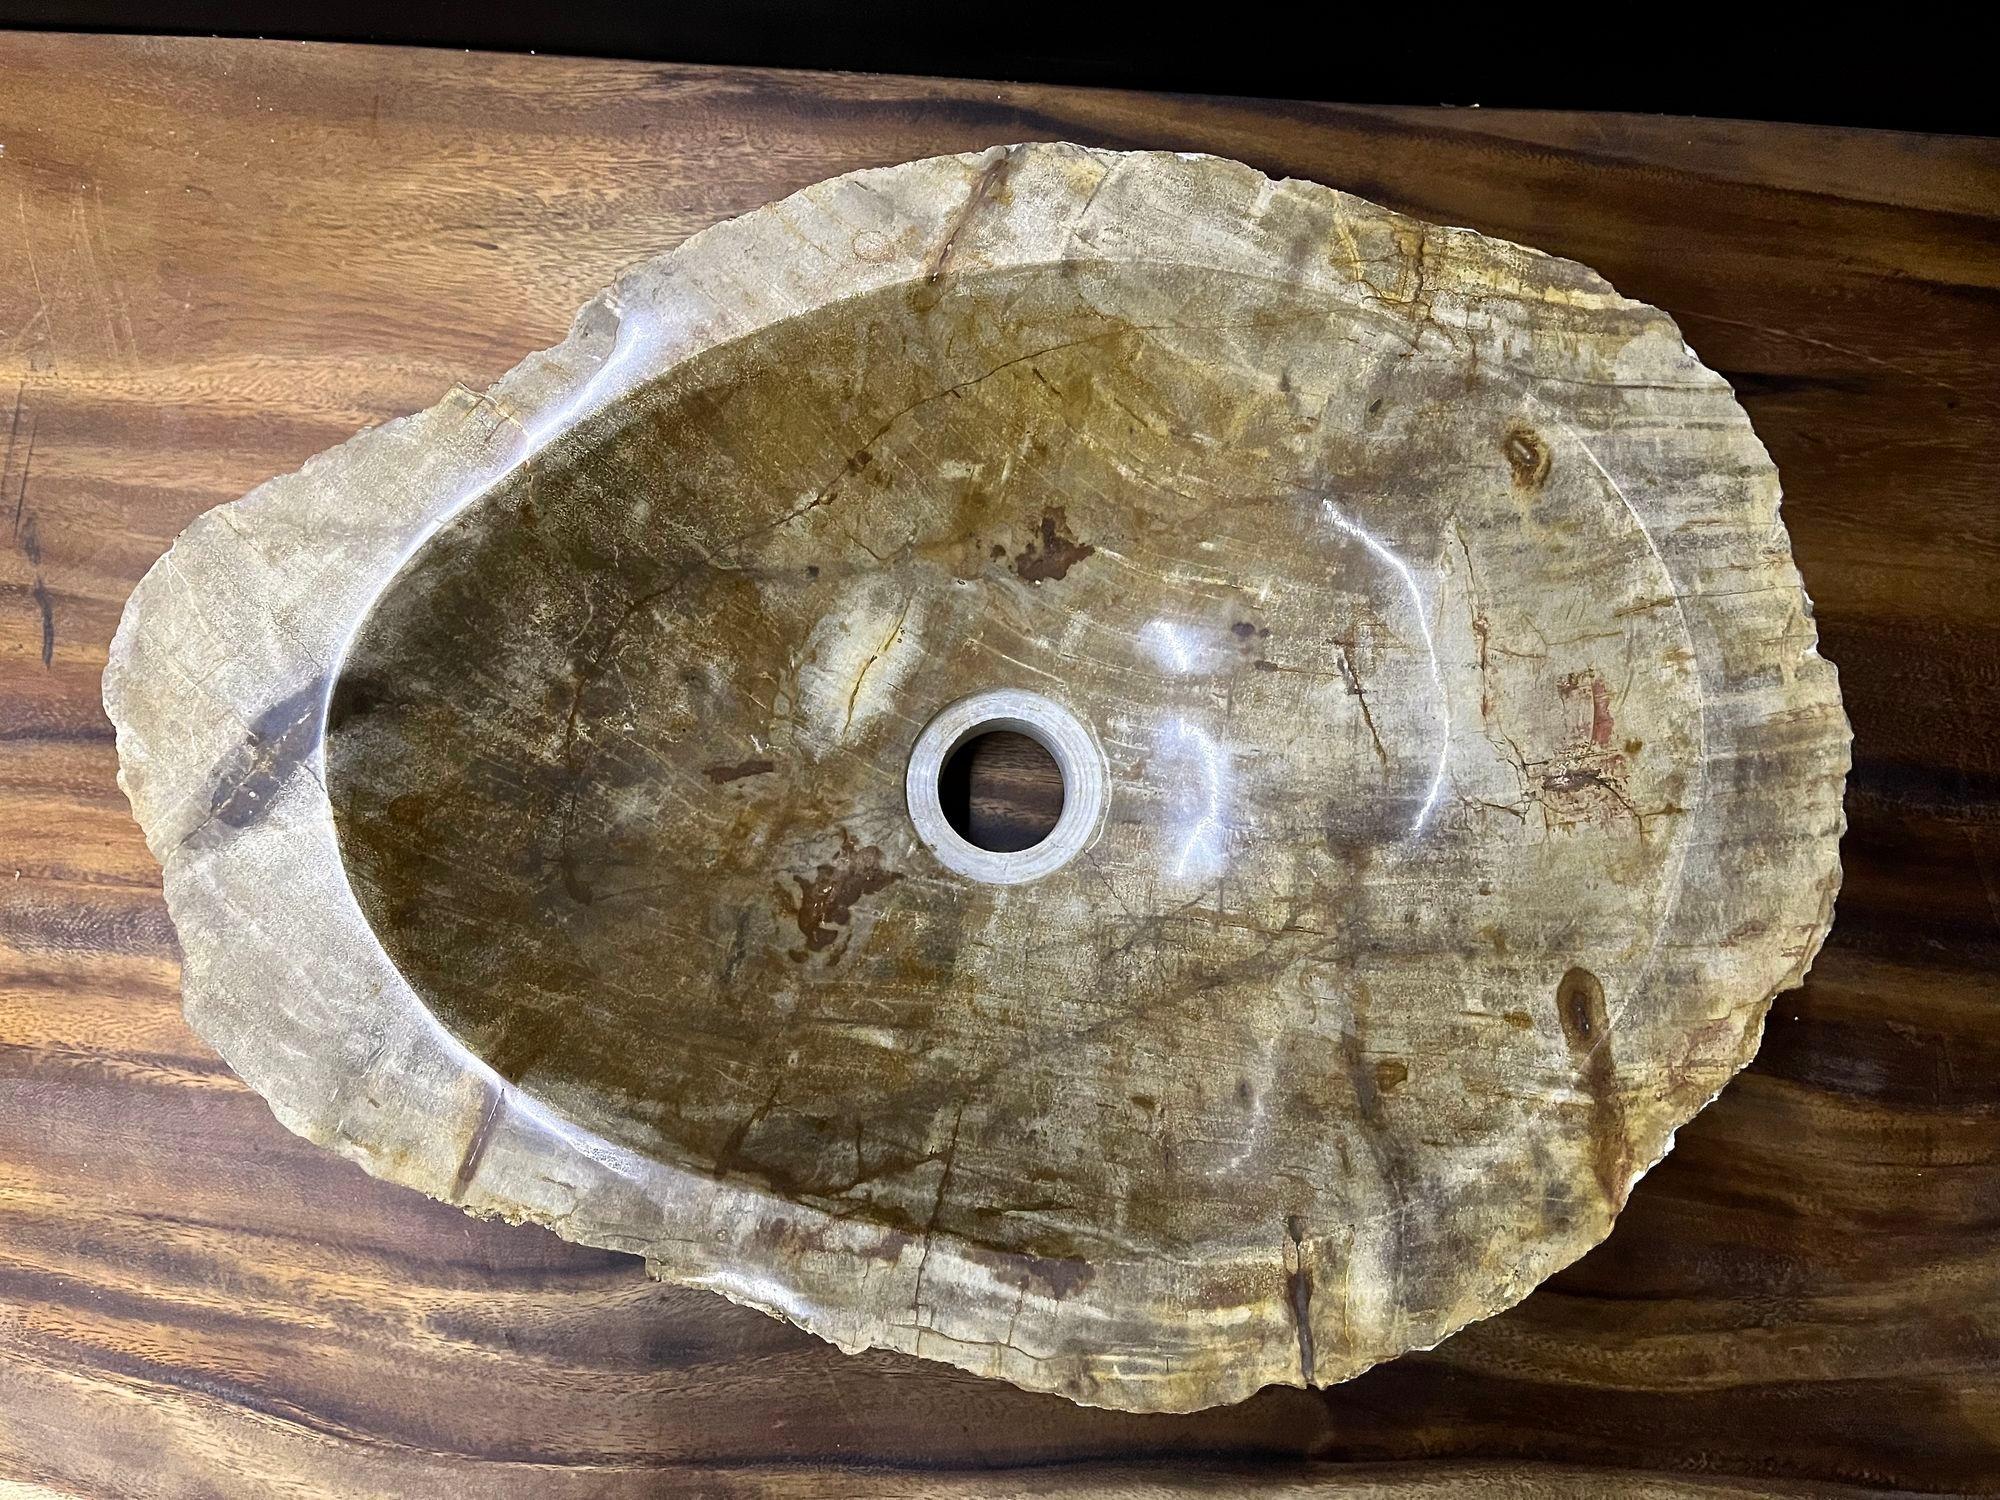 Amazing looking organic modern petrified wood sink in absolute top quality. This one of a kind sink impresses with its extraordinary shape and fantastic patterns in different beautiful brown, grey and beige tones. The inside of the sink comes with a